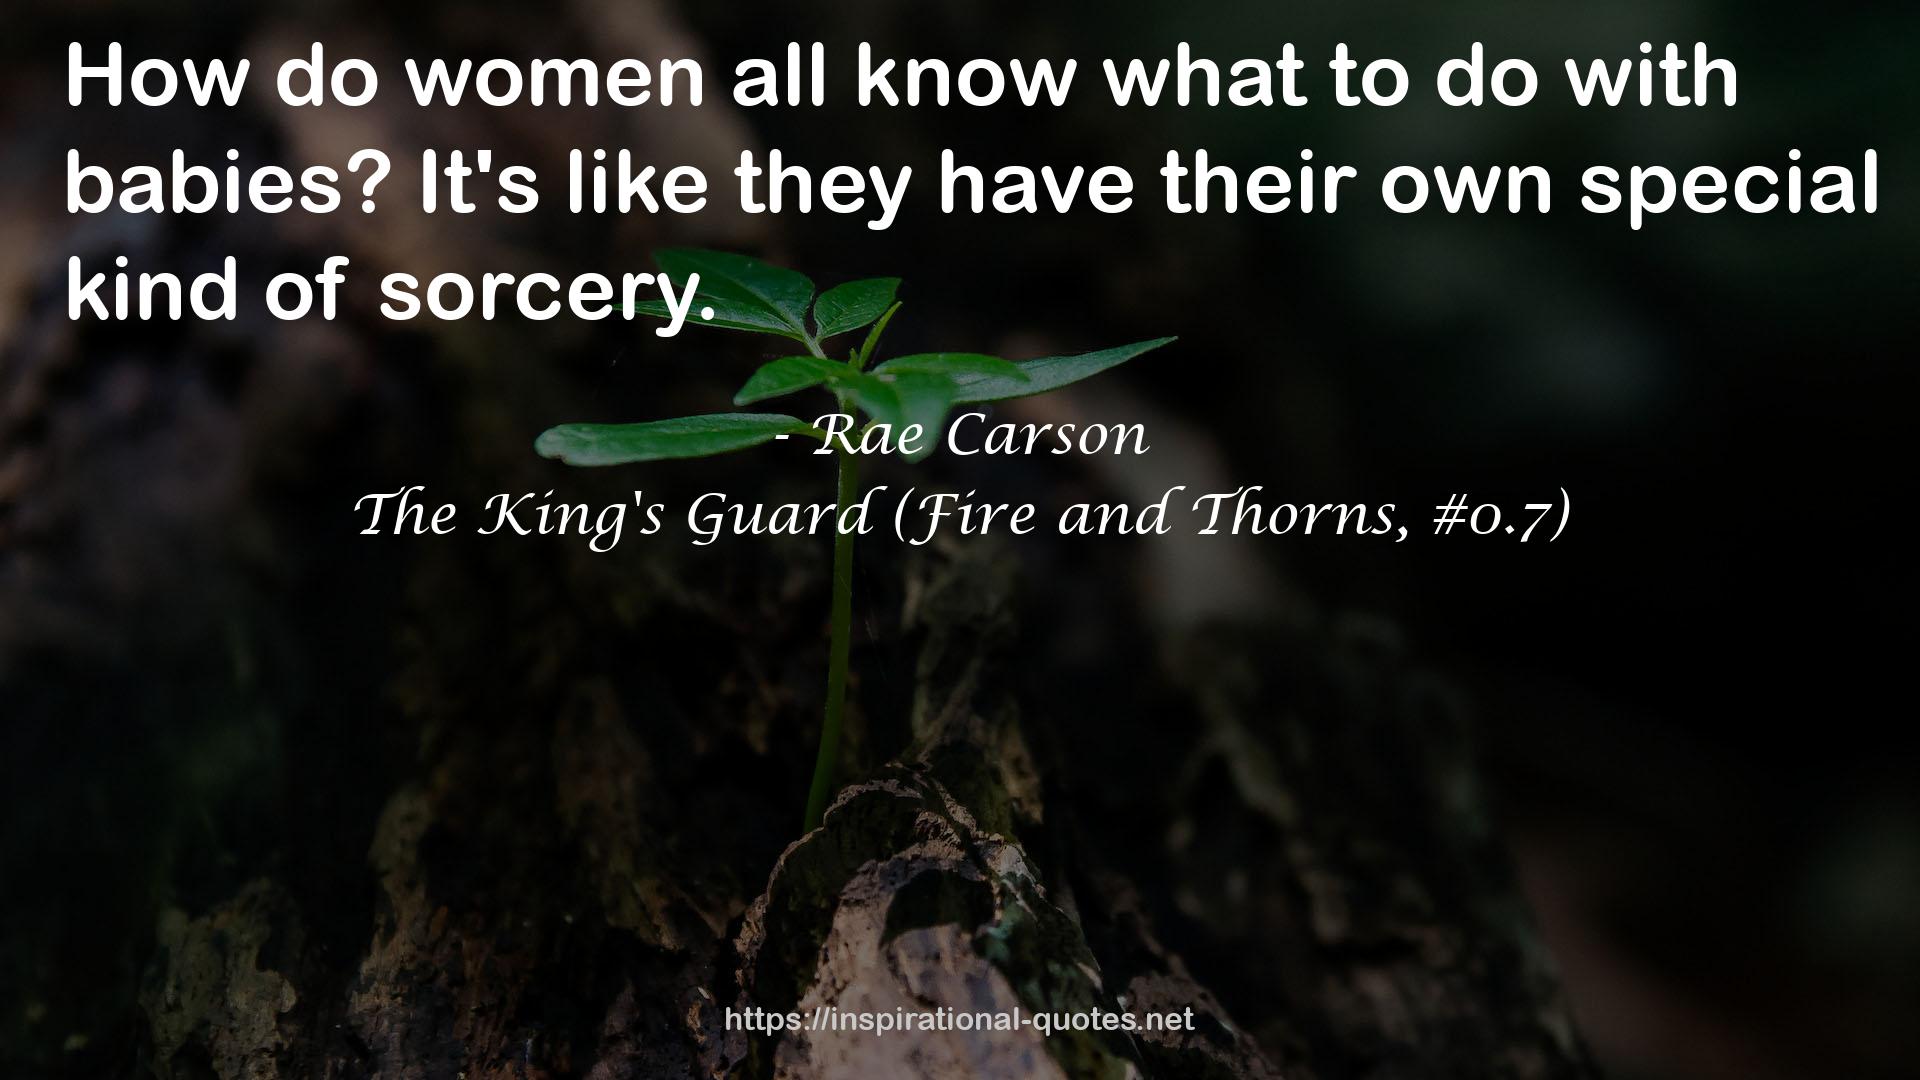 The King's Guard (Fire and Thorns, #0.7) QUOTES